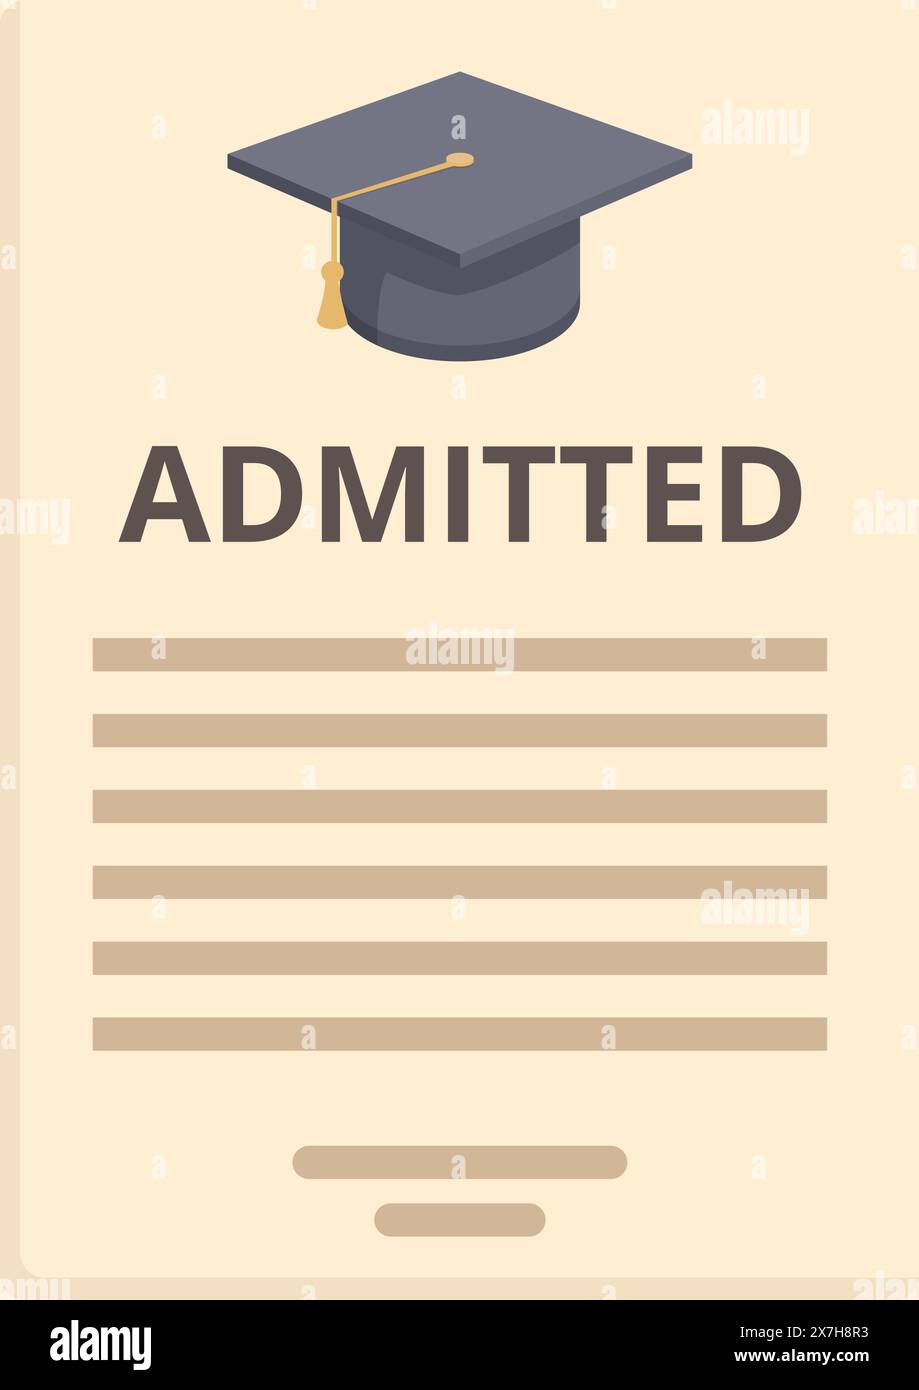 Illustration of an accepted college admission letter with a graduation cap symbol Stock Vector